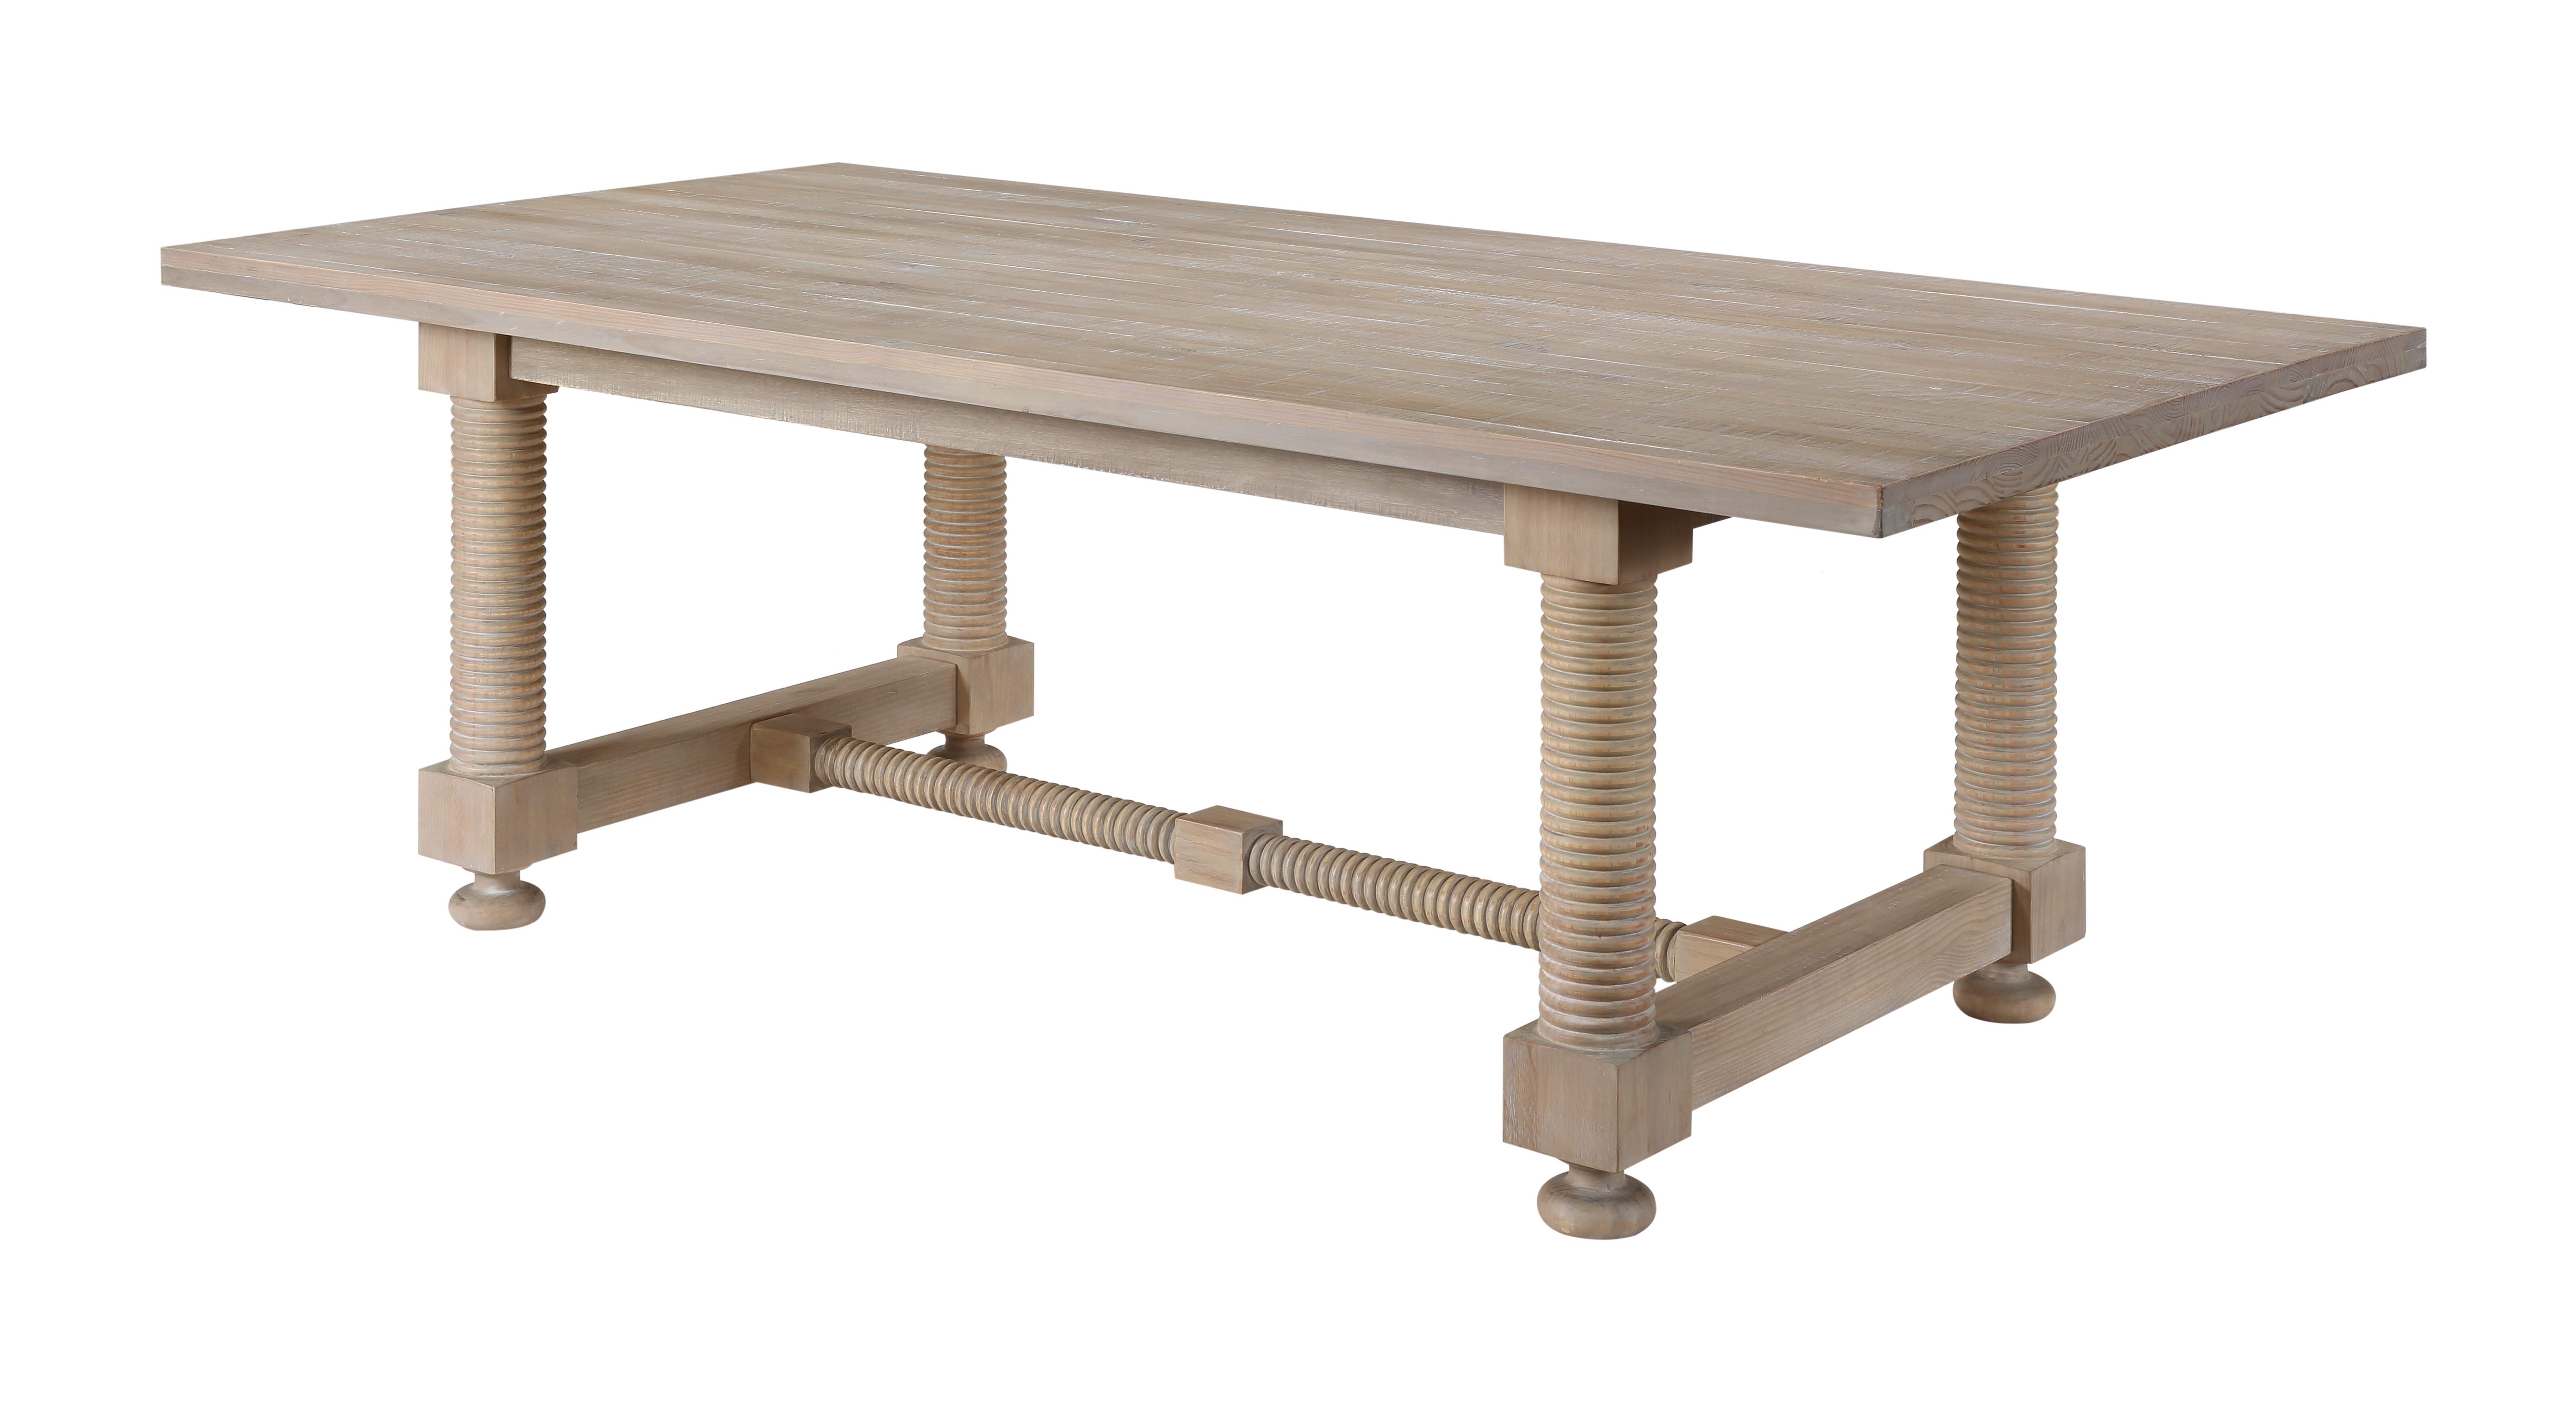 Barrister Rectangular Dining Table - 2 Cartons - Barrister Distressed - Sycamore Home